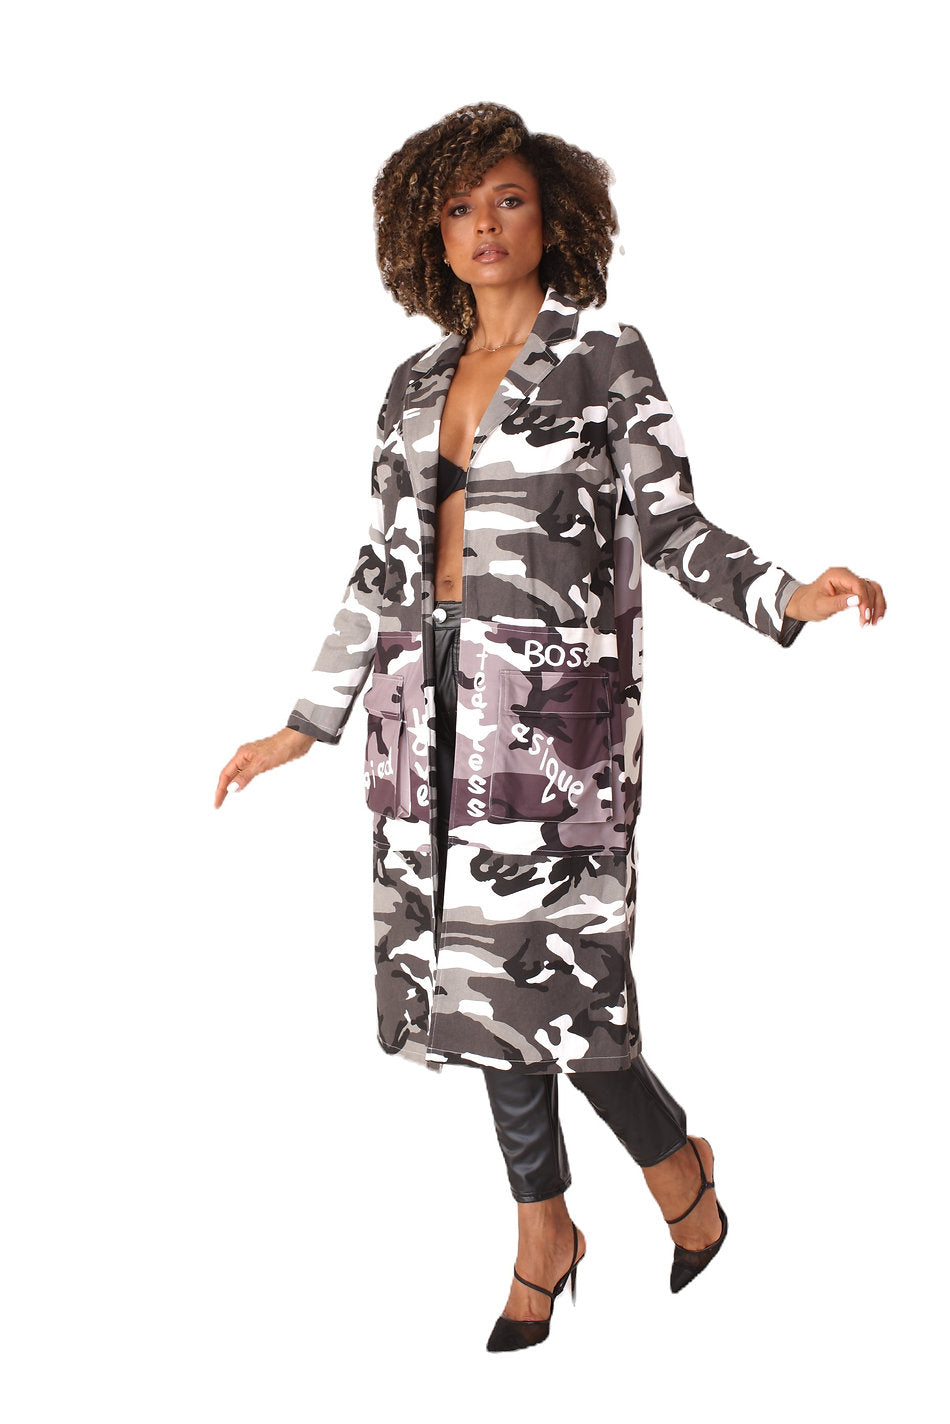 For Her Women Jacket 81897-Grey Camo - Church Suits For Less